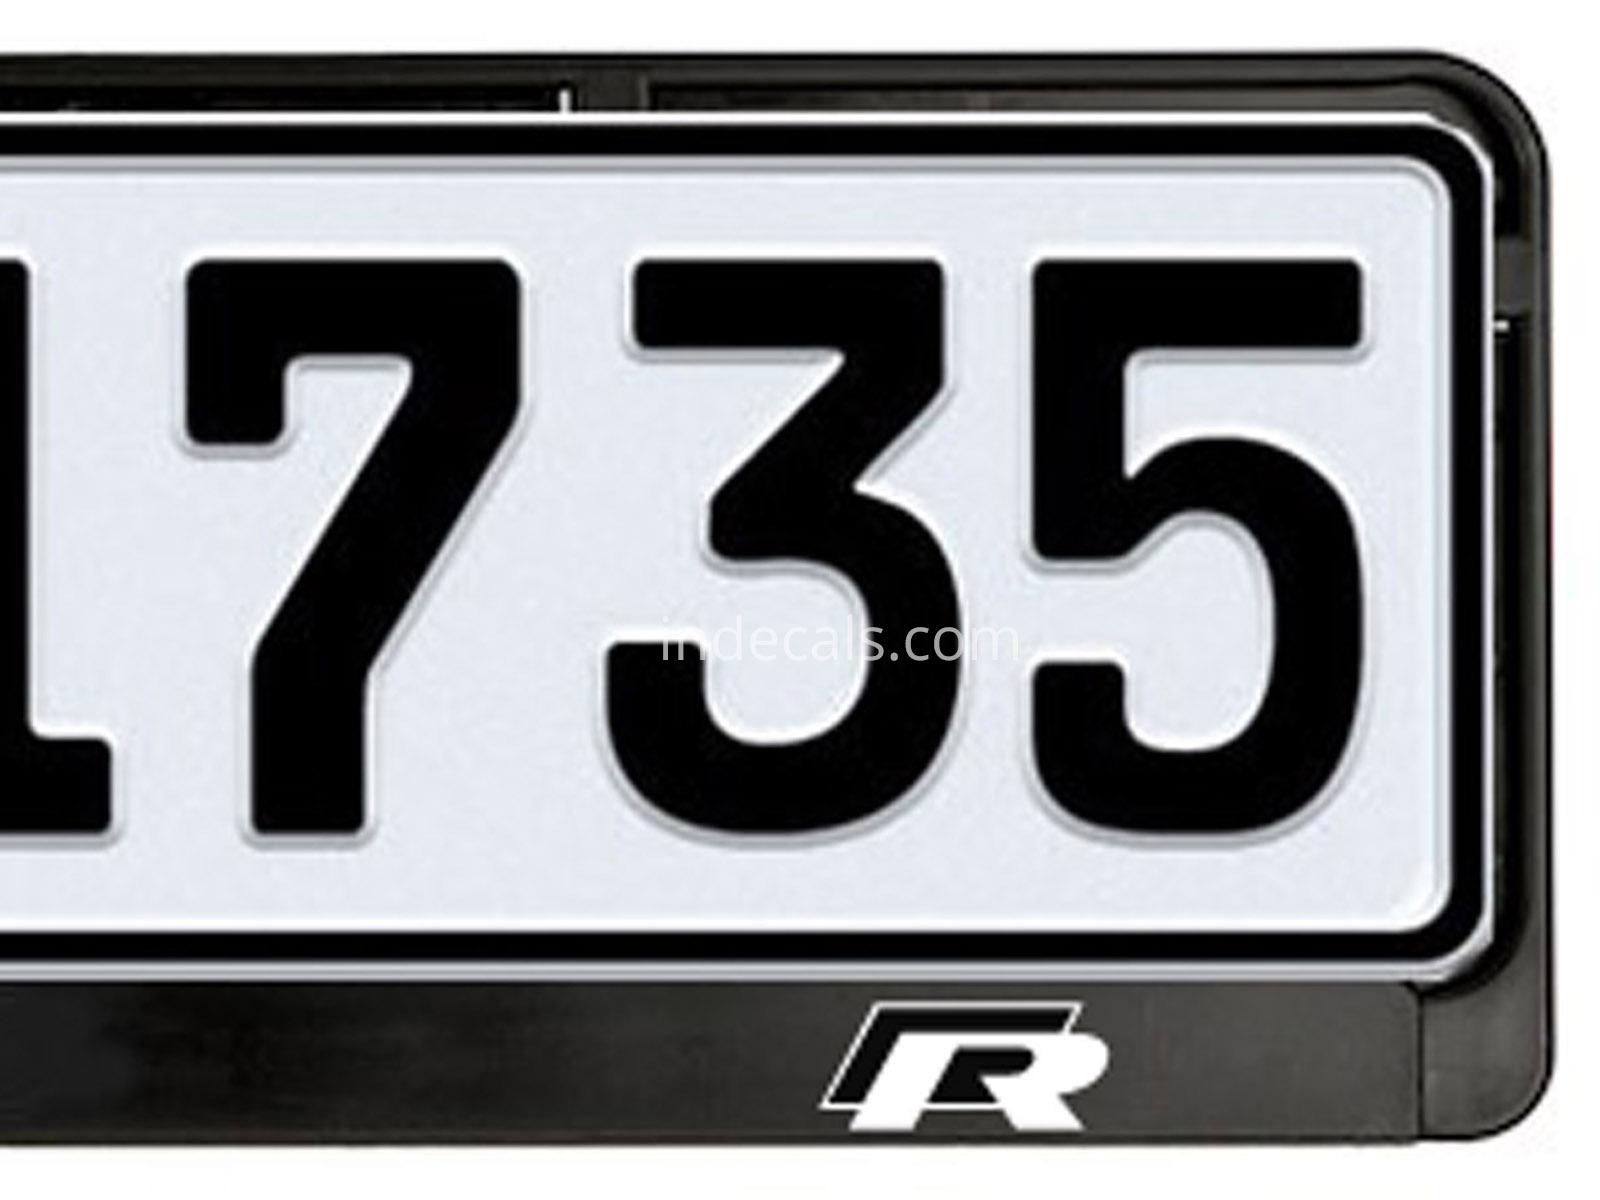 2 x Volkswagen R-Line stickers for License Plate Frame